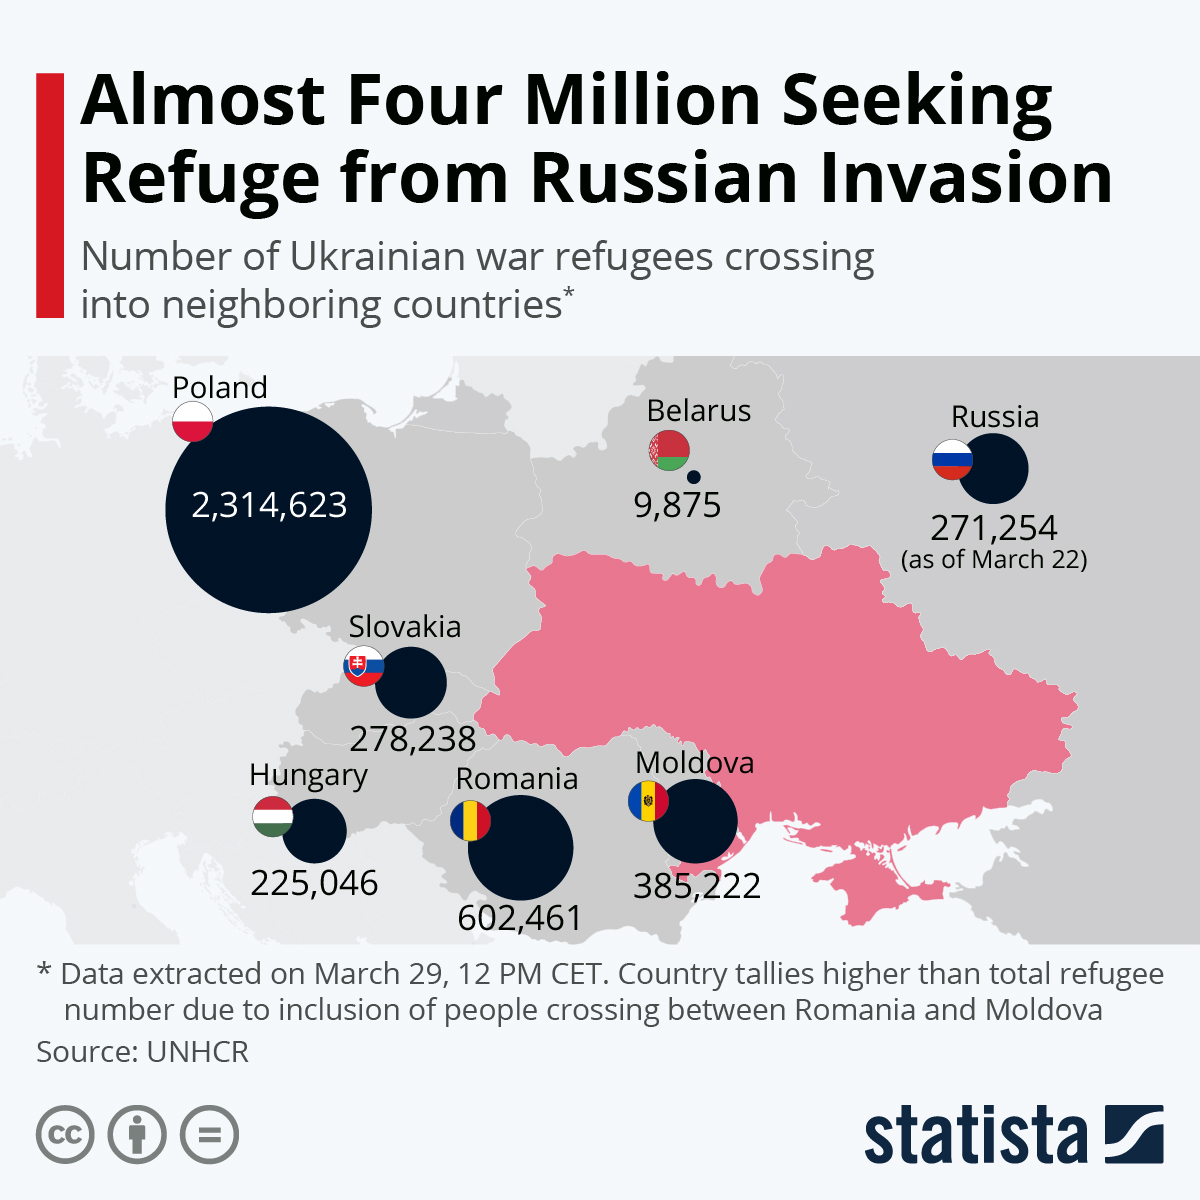 Almost Four Million Seeking Refuge from Russian Invasion